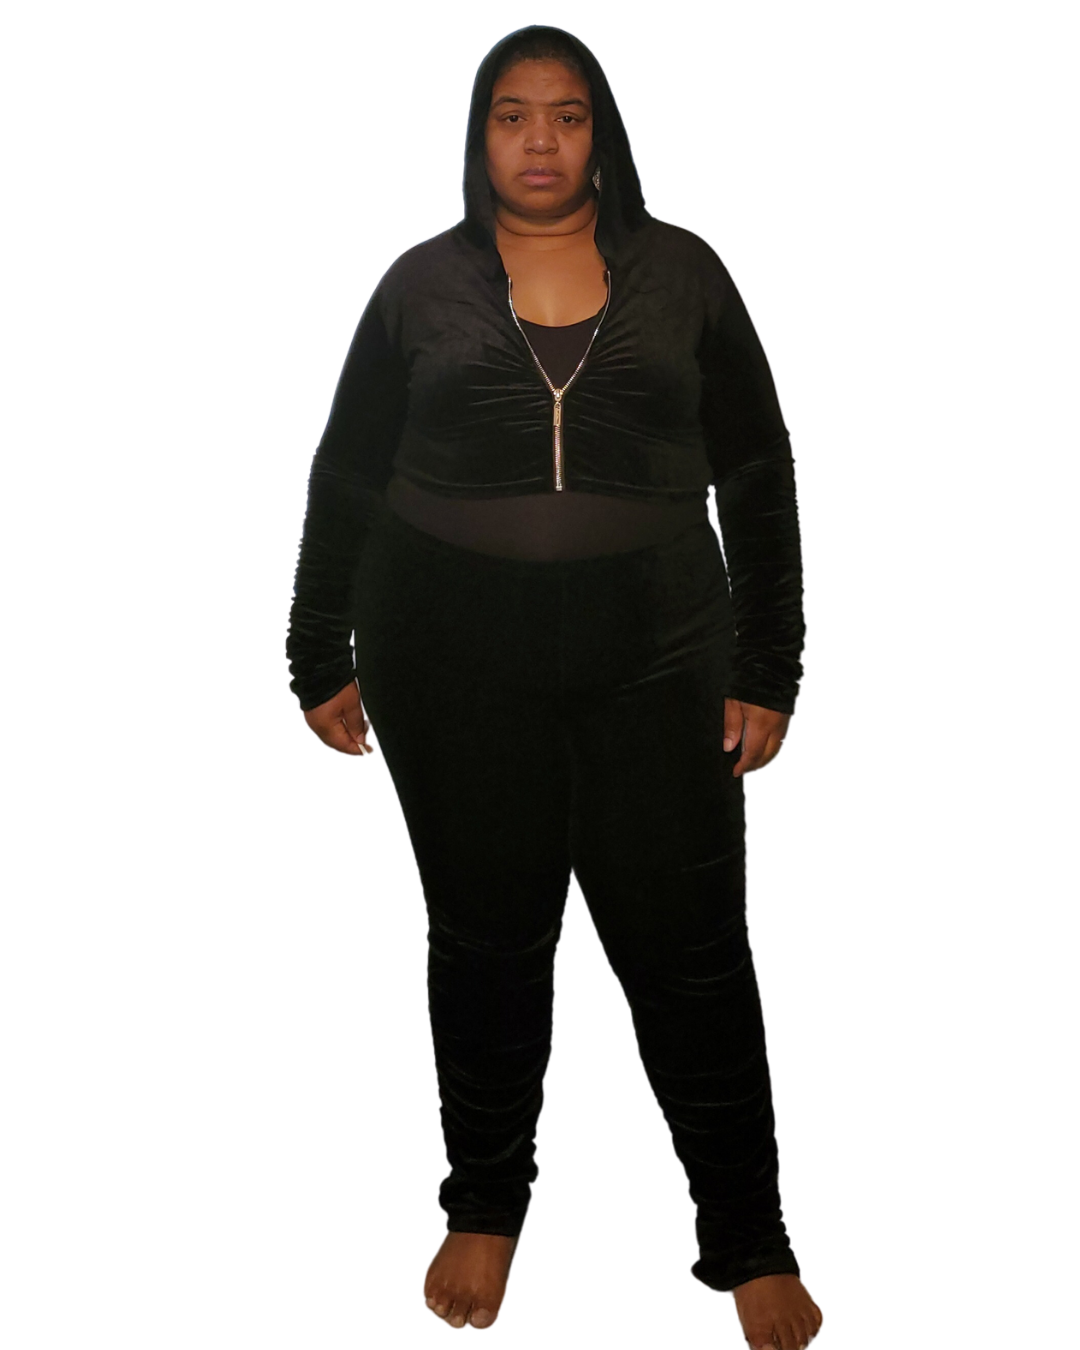 1x-3x black valour 2 pc set. the top is crop with a hood and zipper.